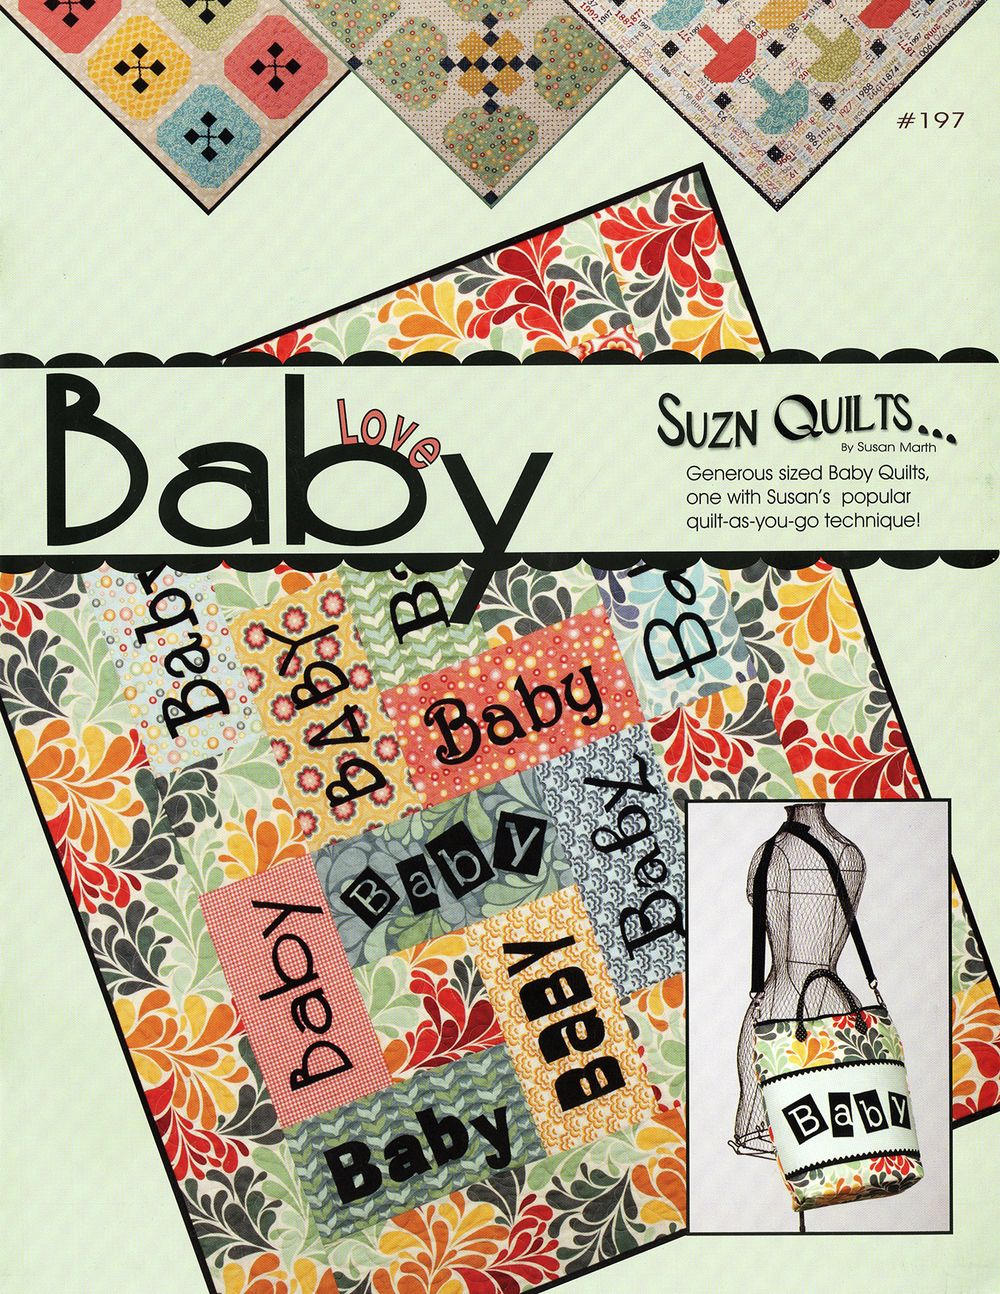 Baby Love Quilt Pattern Book by Susan Marth for Suzn Quilts